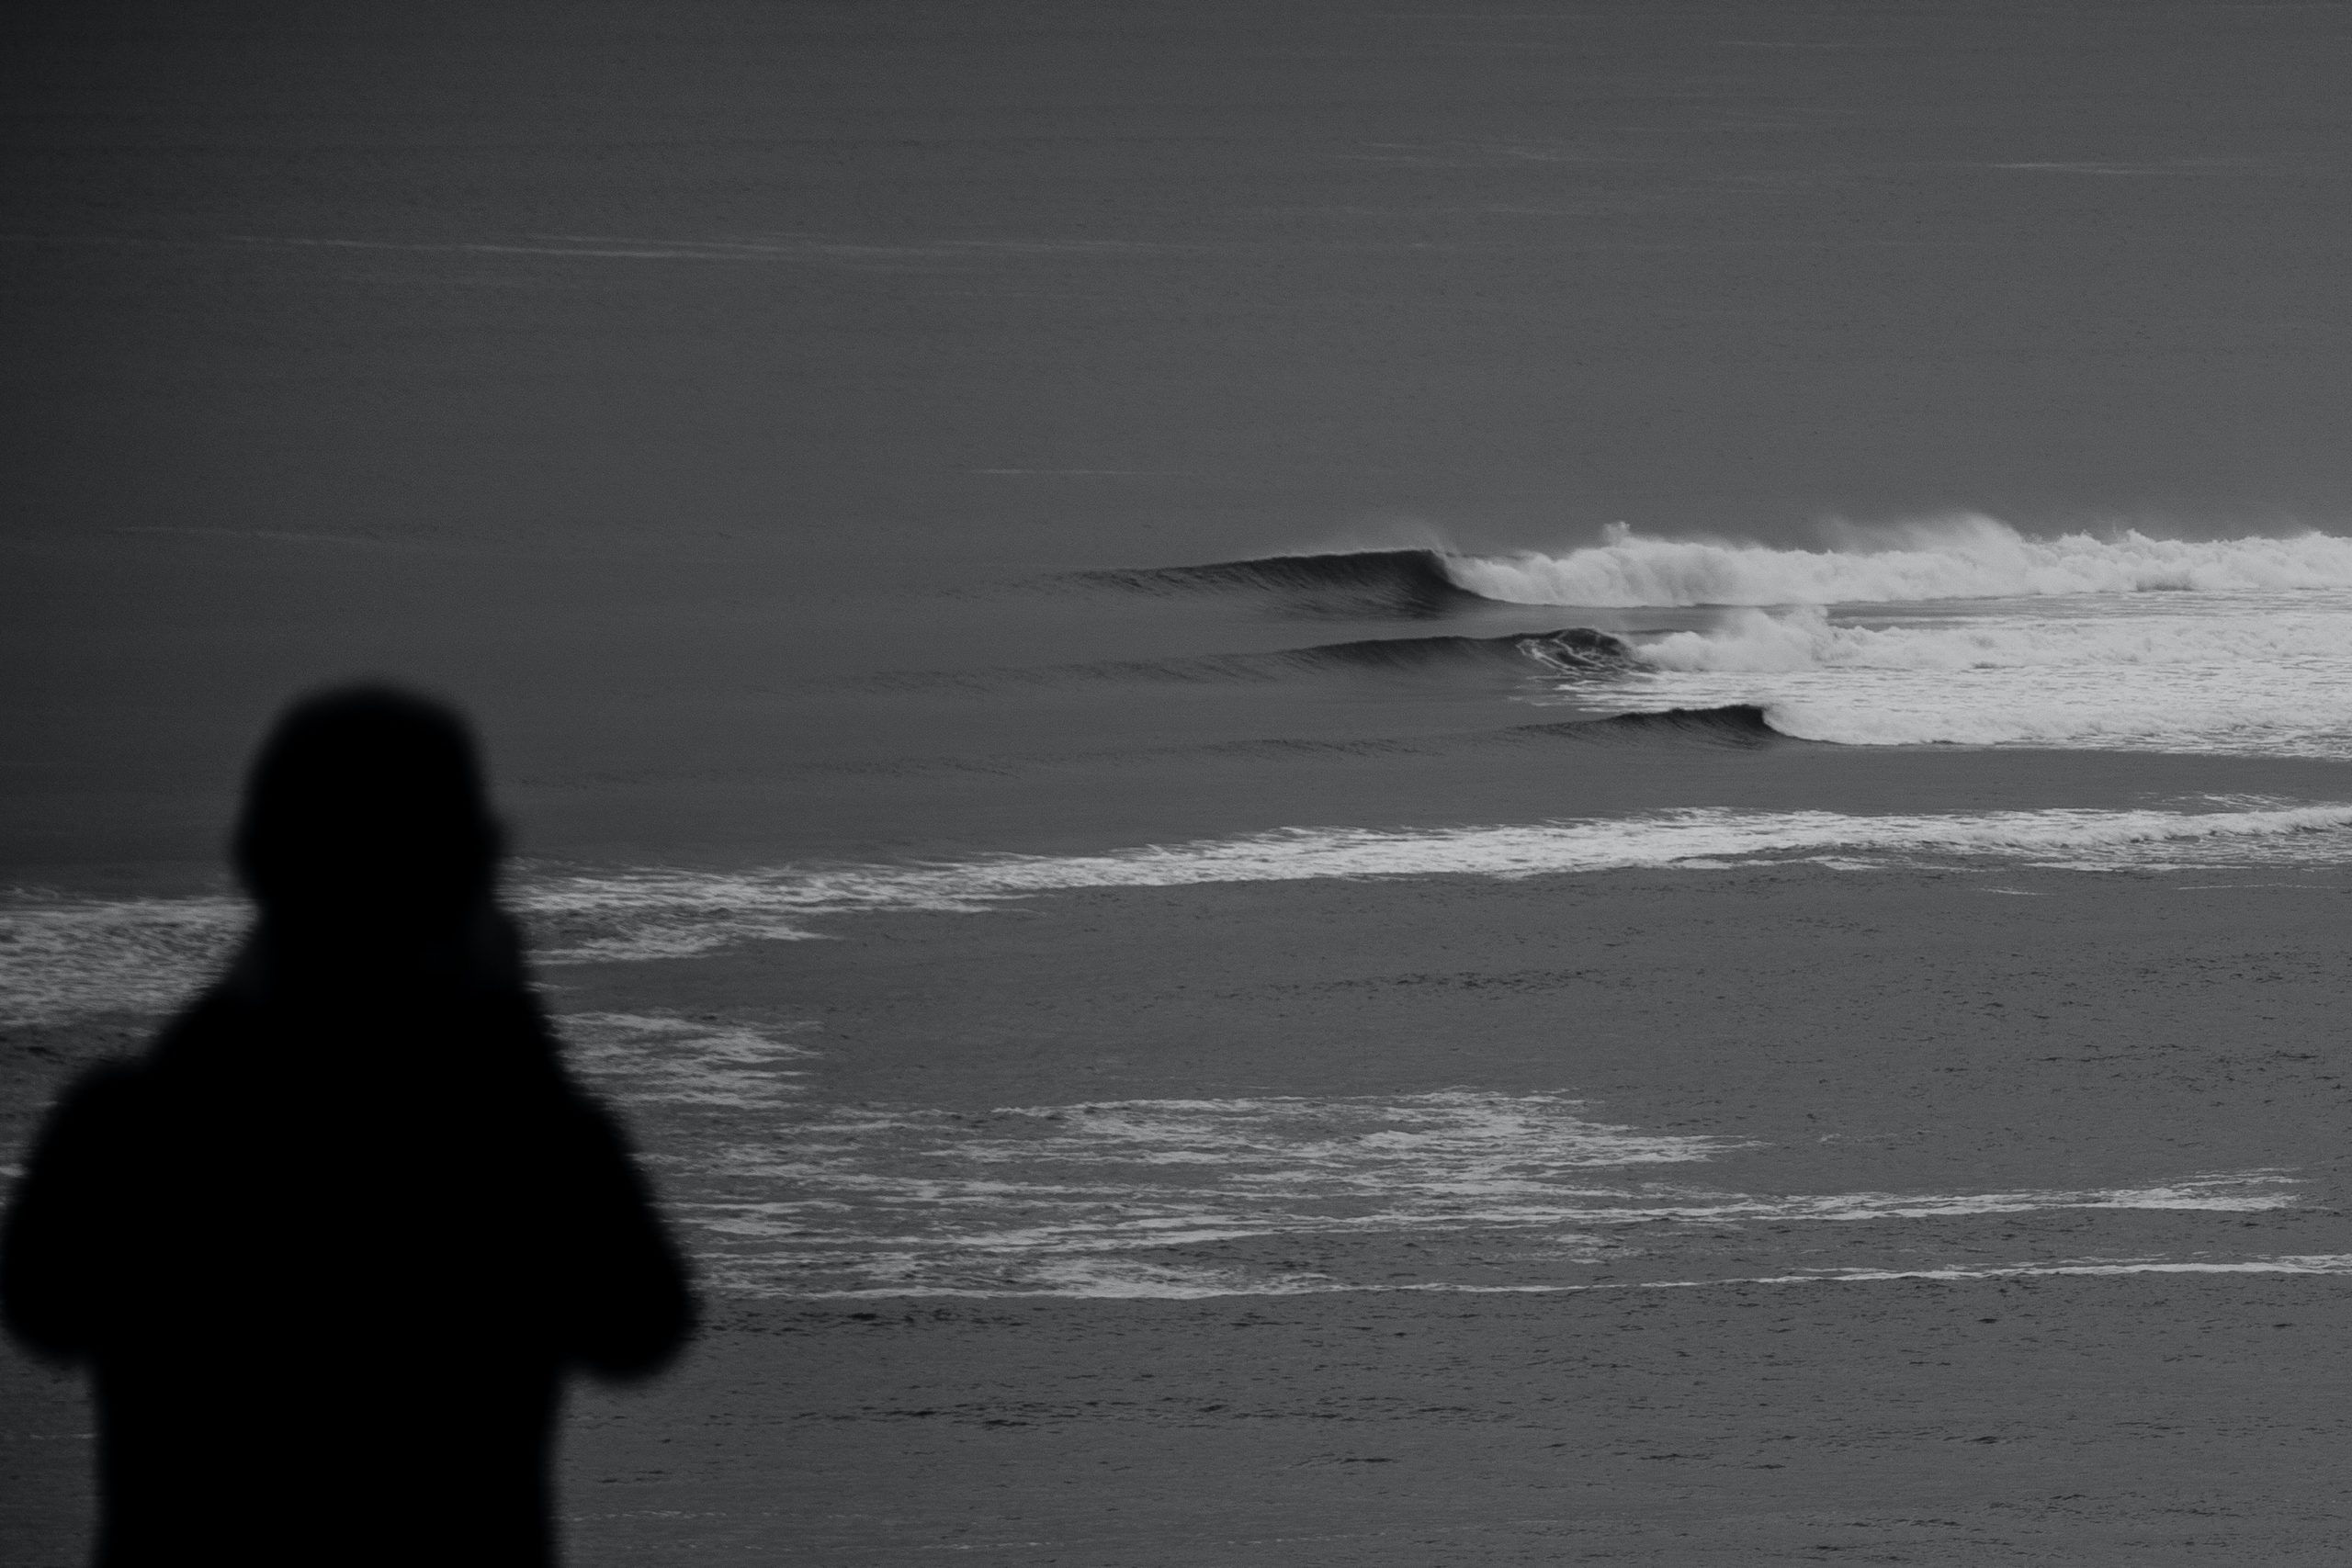 Black and white photo using the rule of thirds, showing a silhouette against a crashing wave